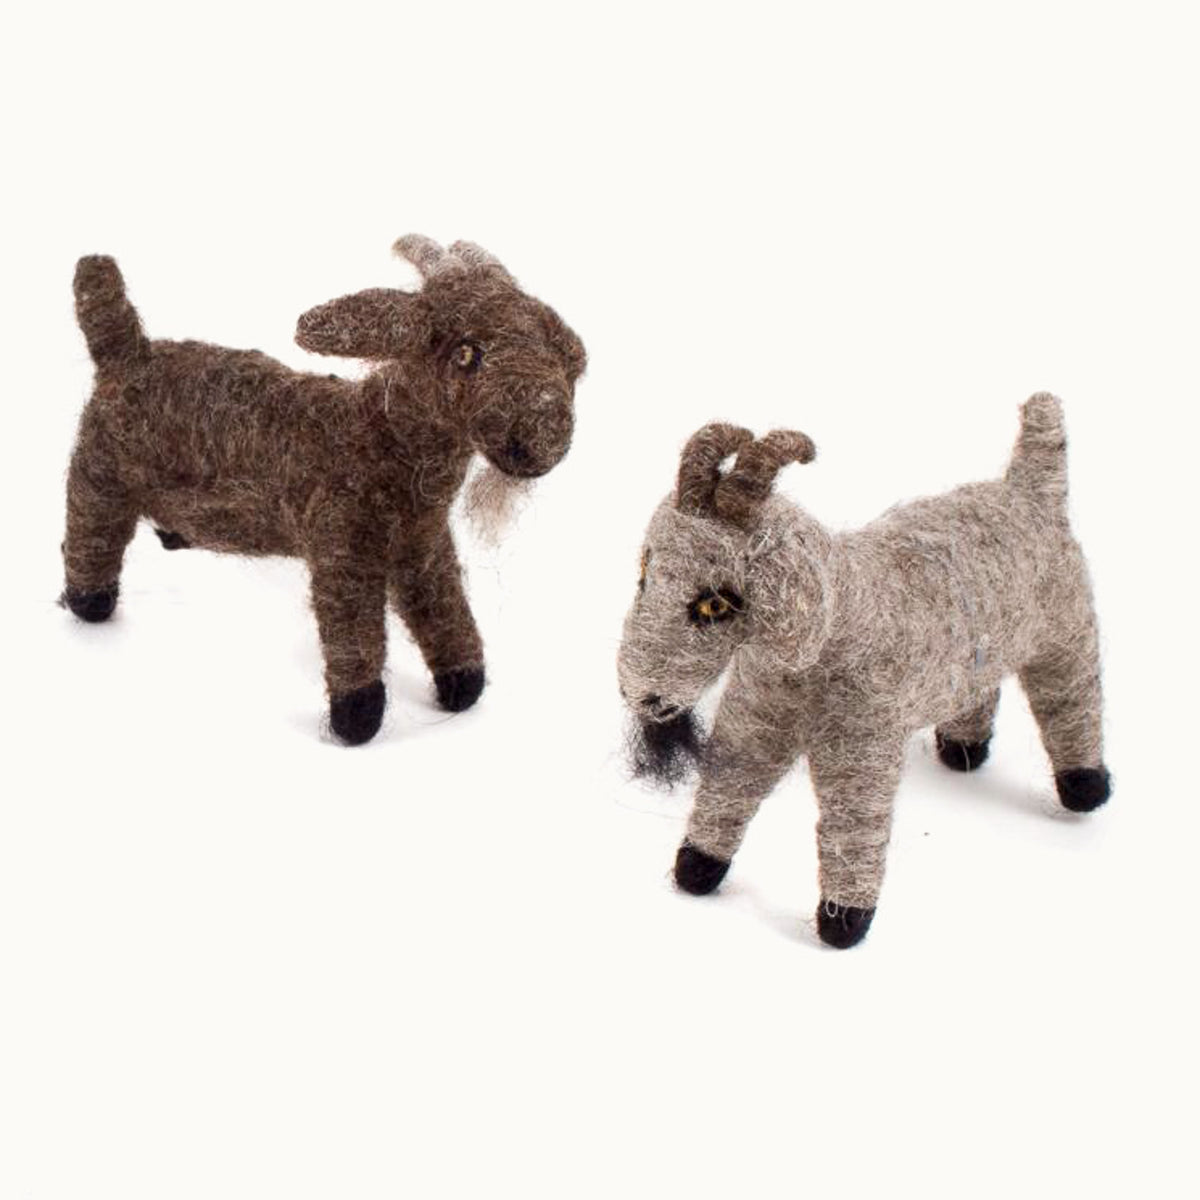 2 felted wool goats - brown and gray